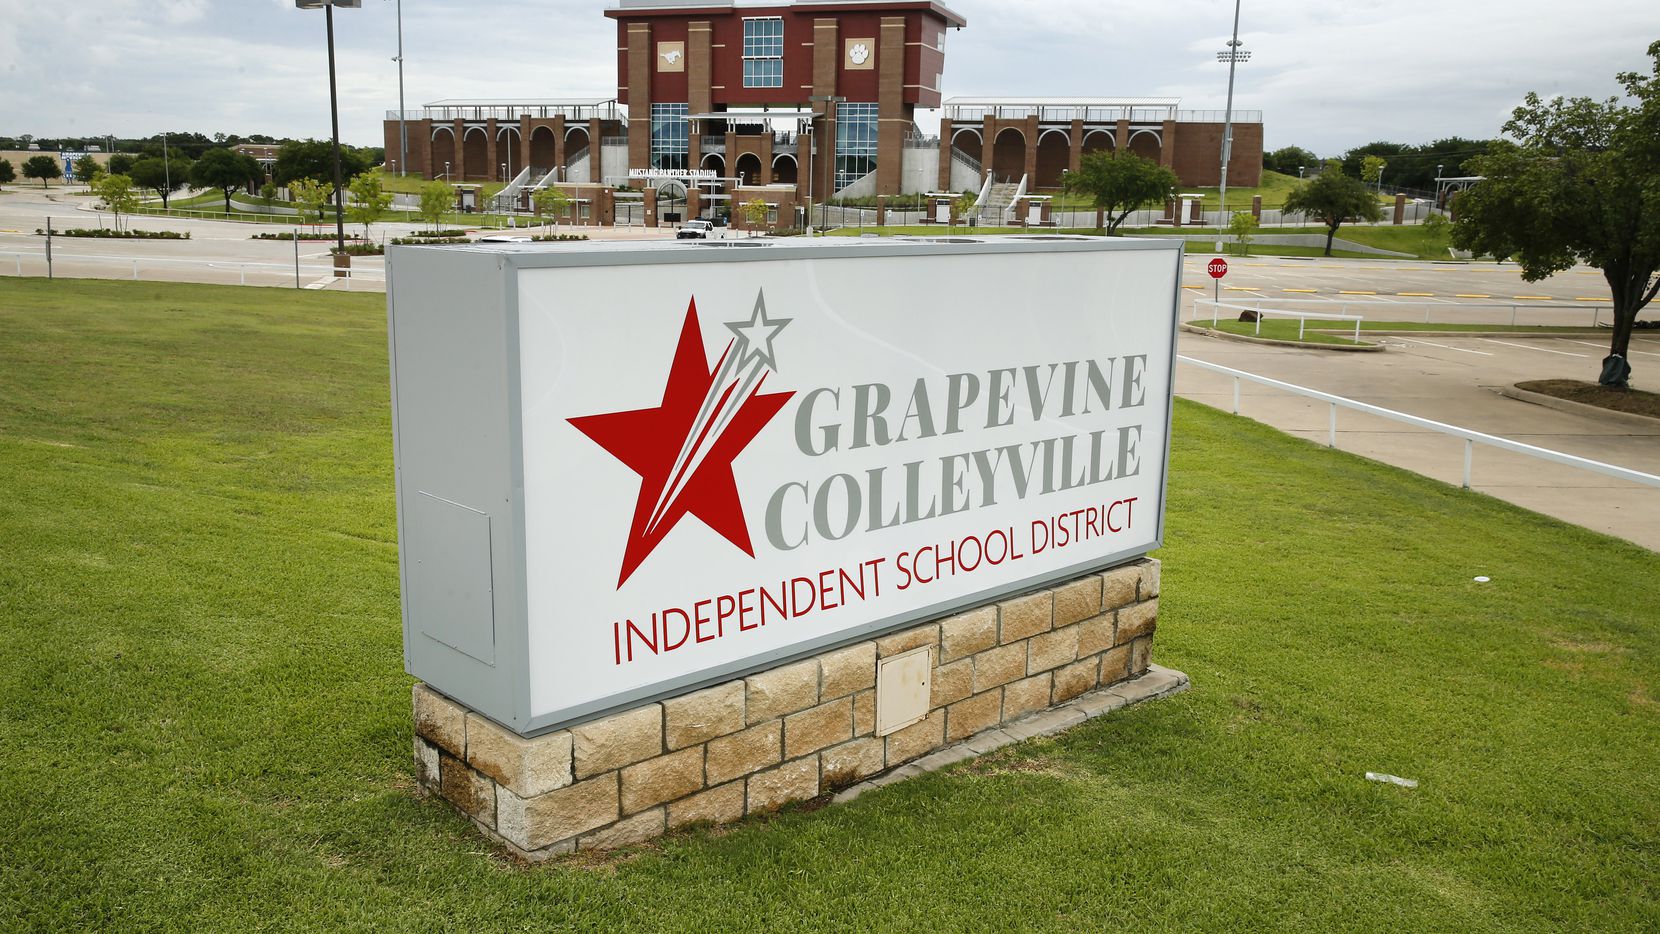 The Grapevine-Colleyville  ISD sign is pictured before Mustang Panther Stadium in Grapevine, Texas, Tuesday, June 23, 2020.